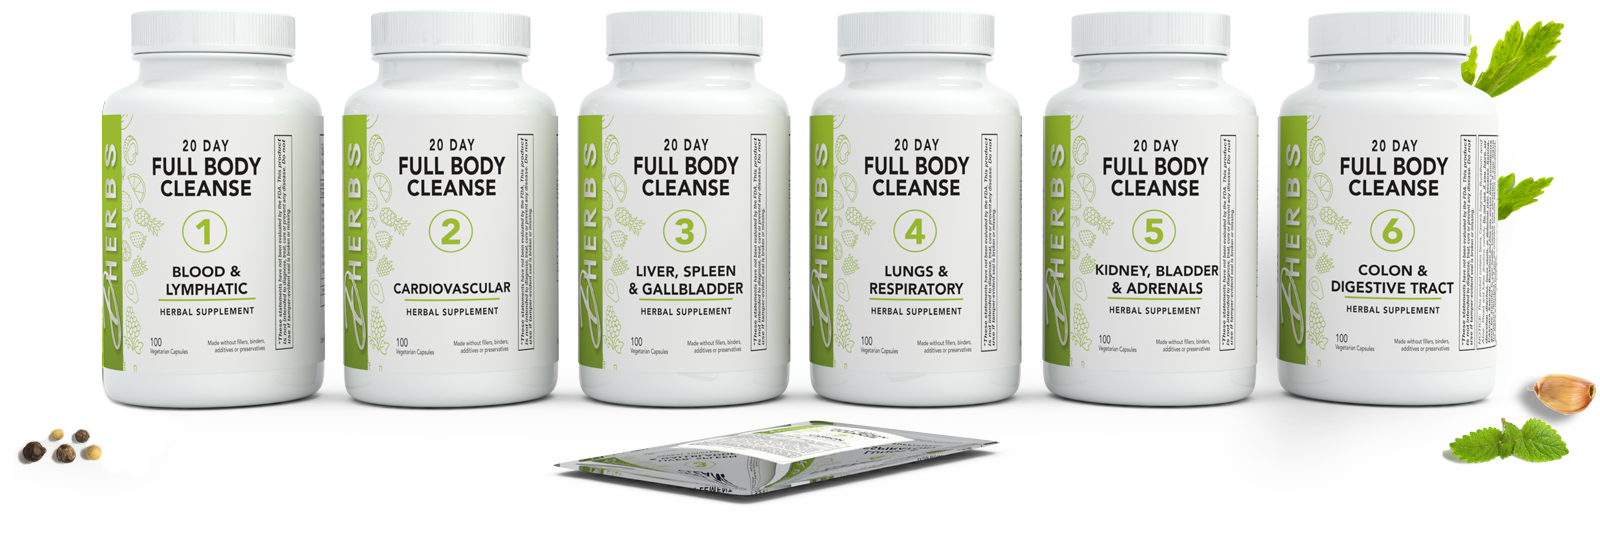 Body cleanse